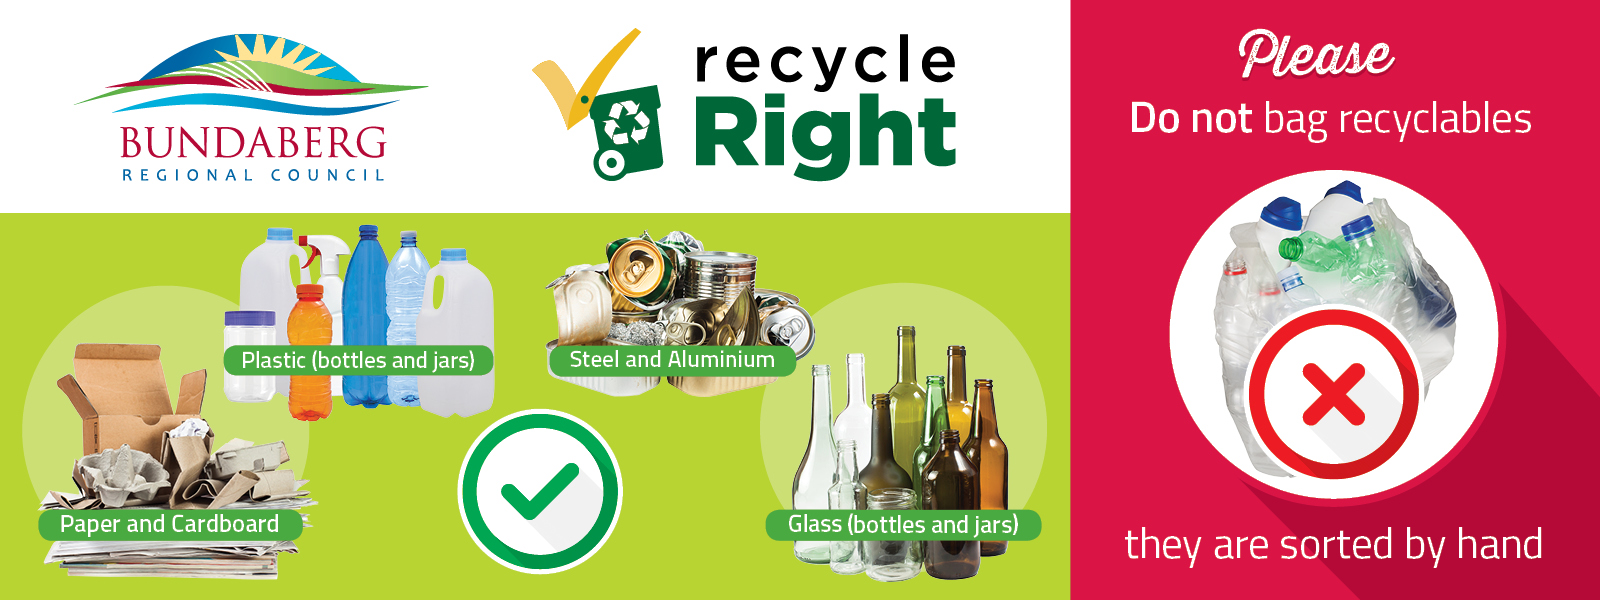 Recycle right banner